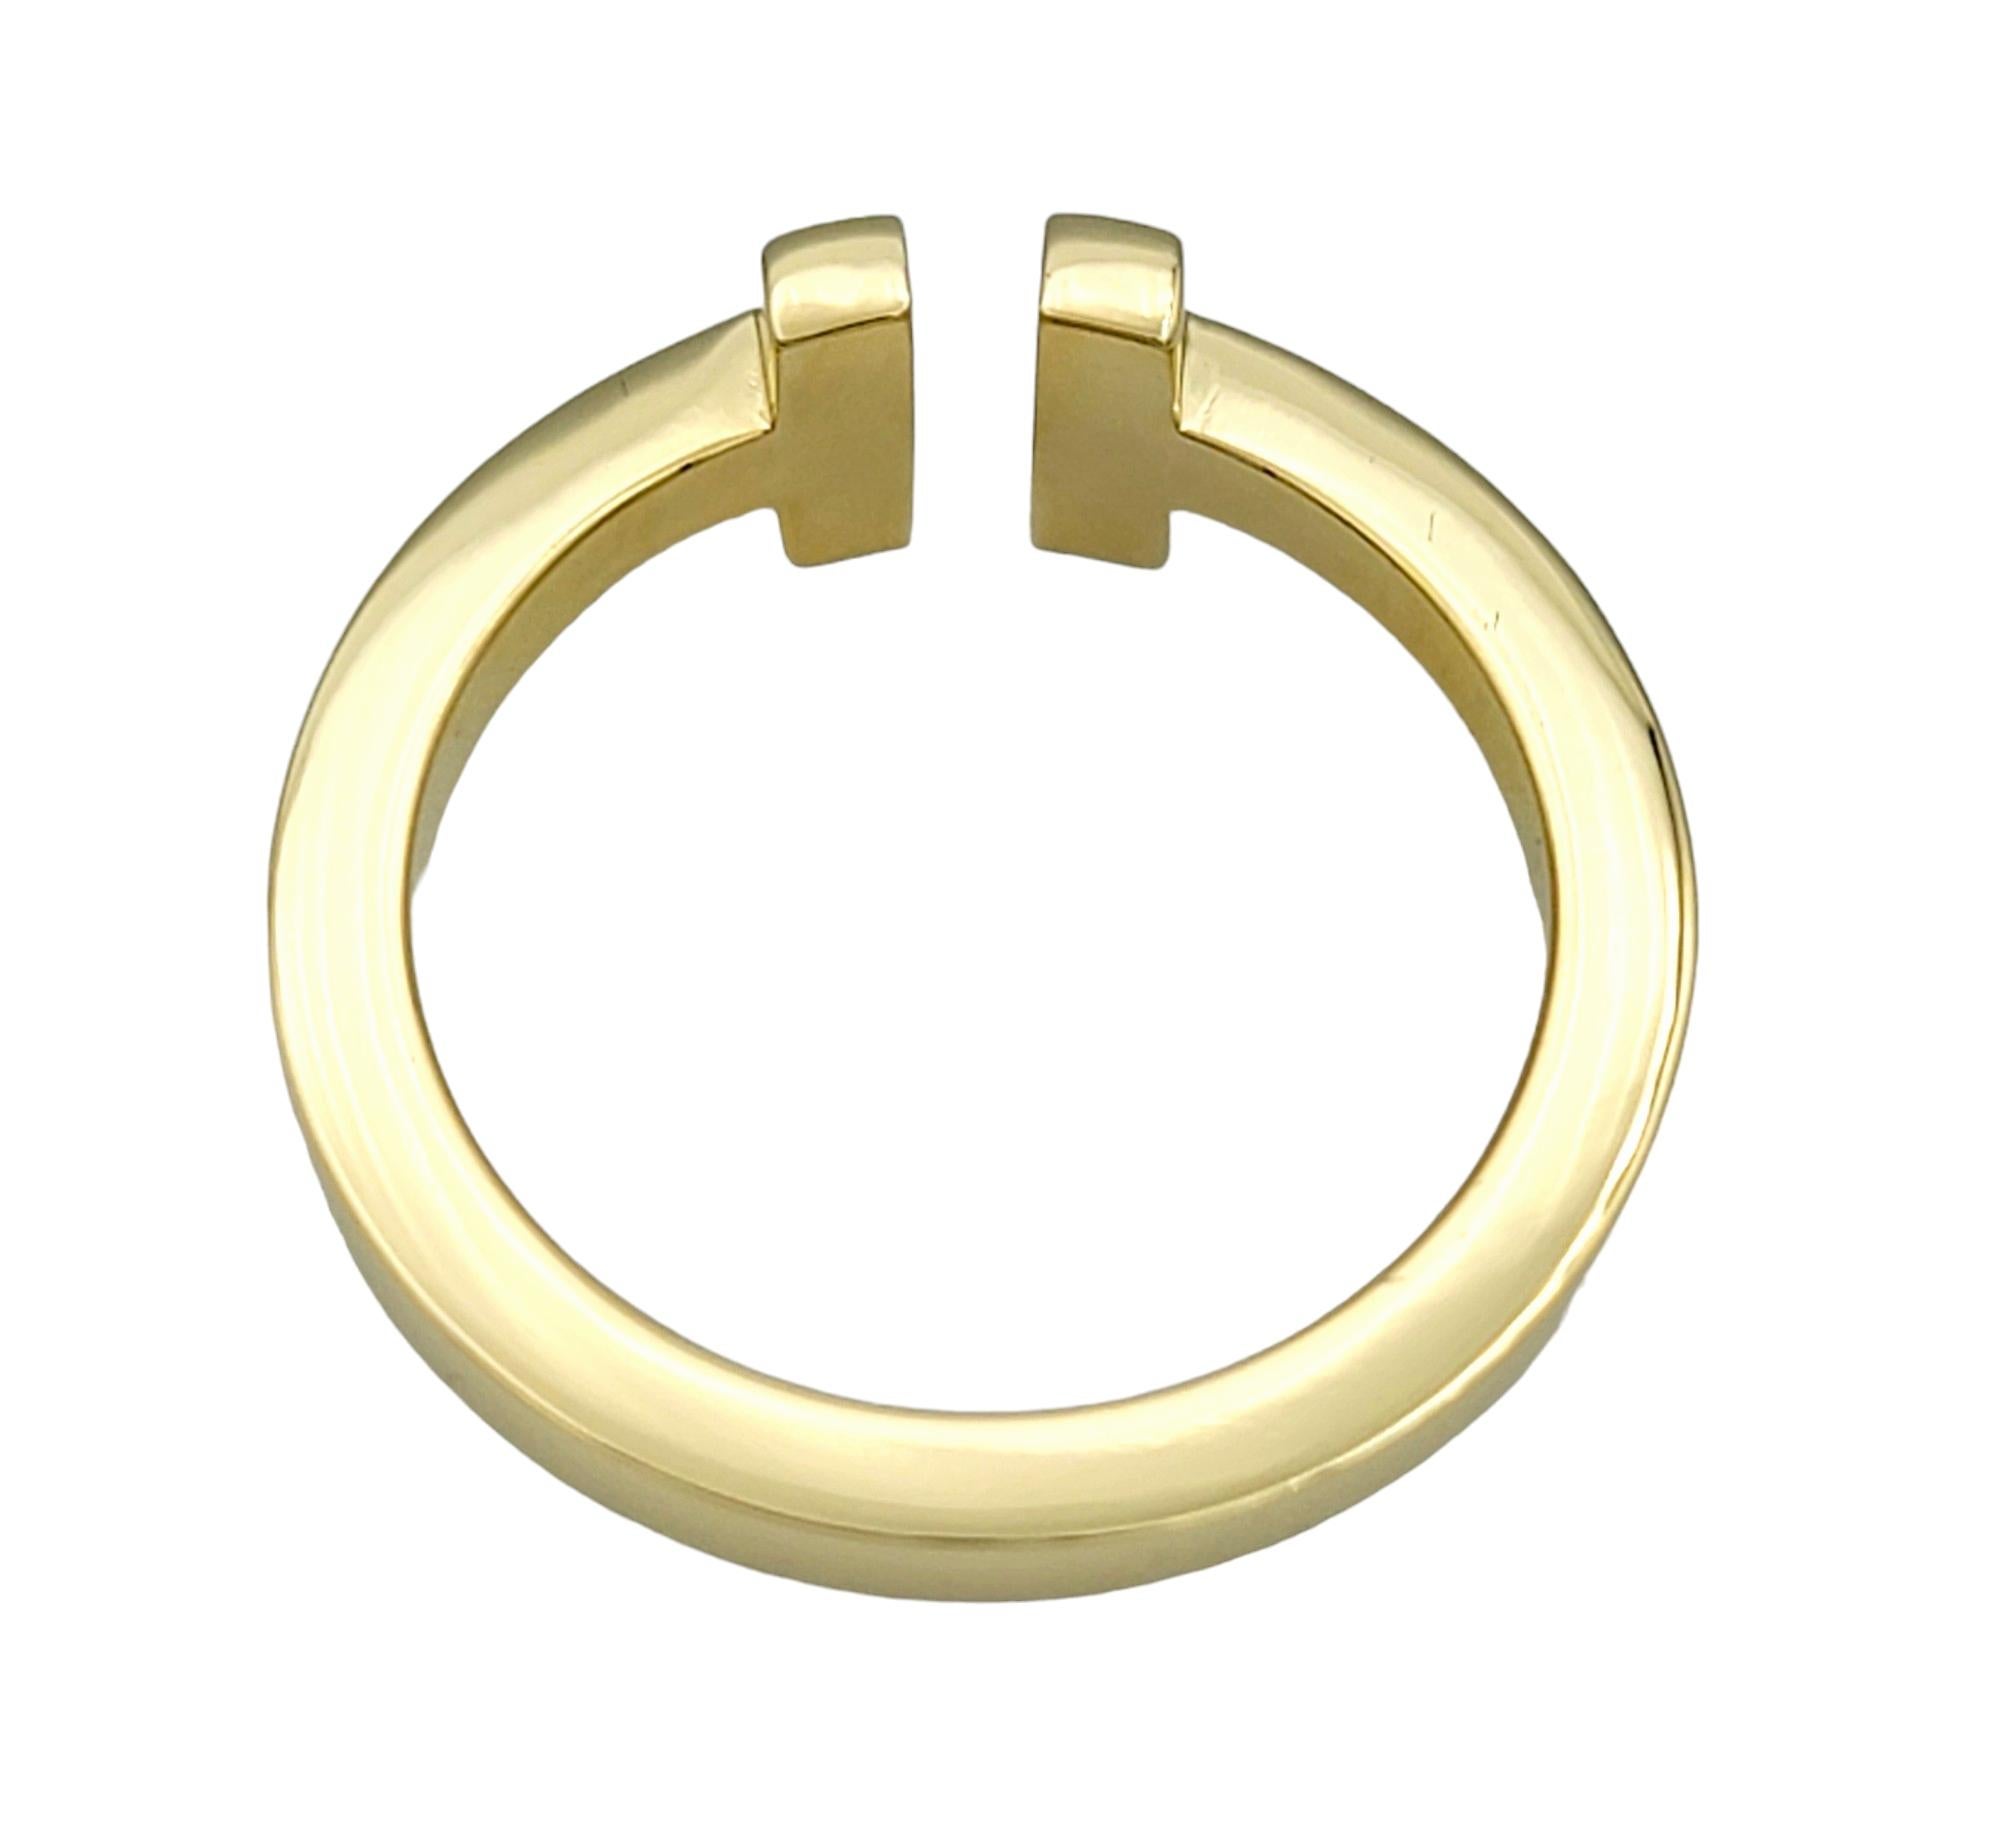 Contemporary Tiffany & Co. Tiffany T Square High Polished Band Ring in 18 Karat Yellow Gold